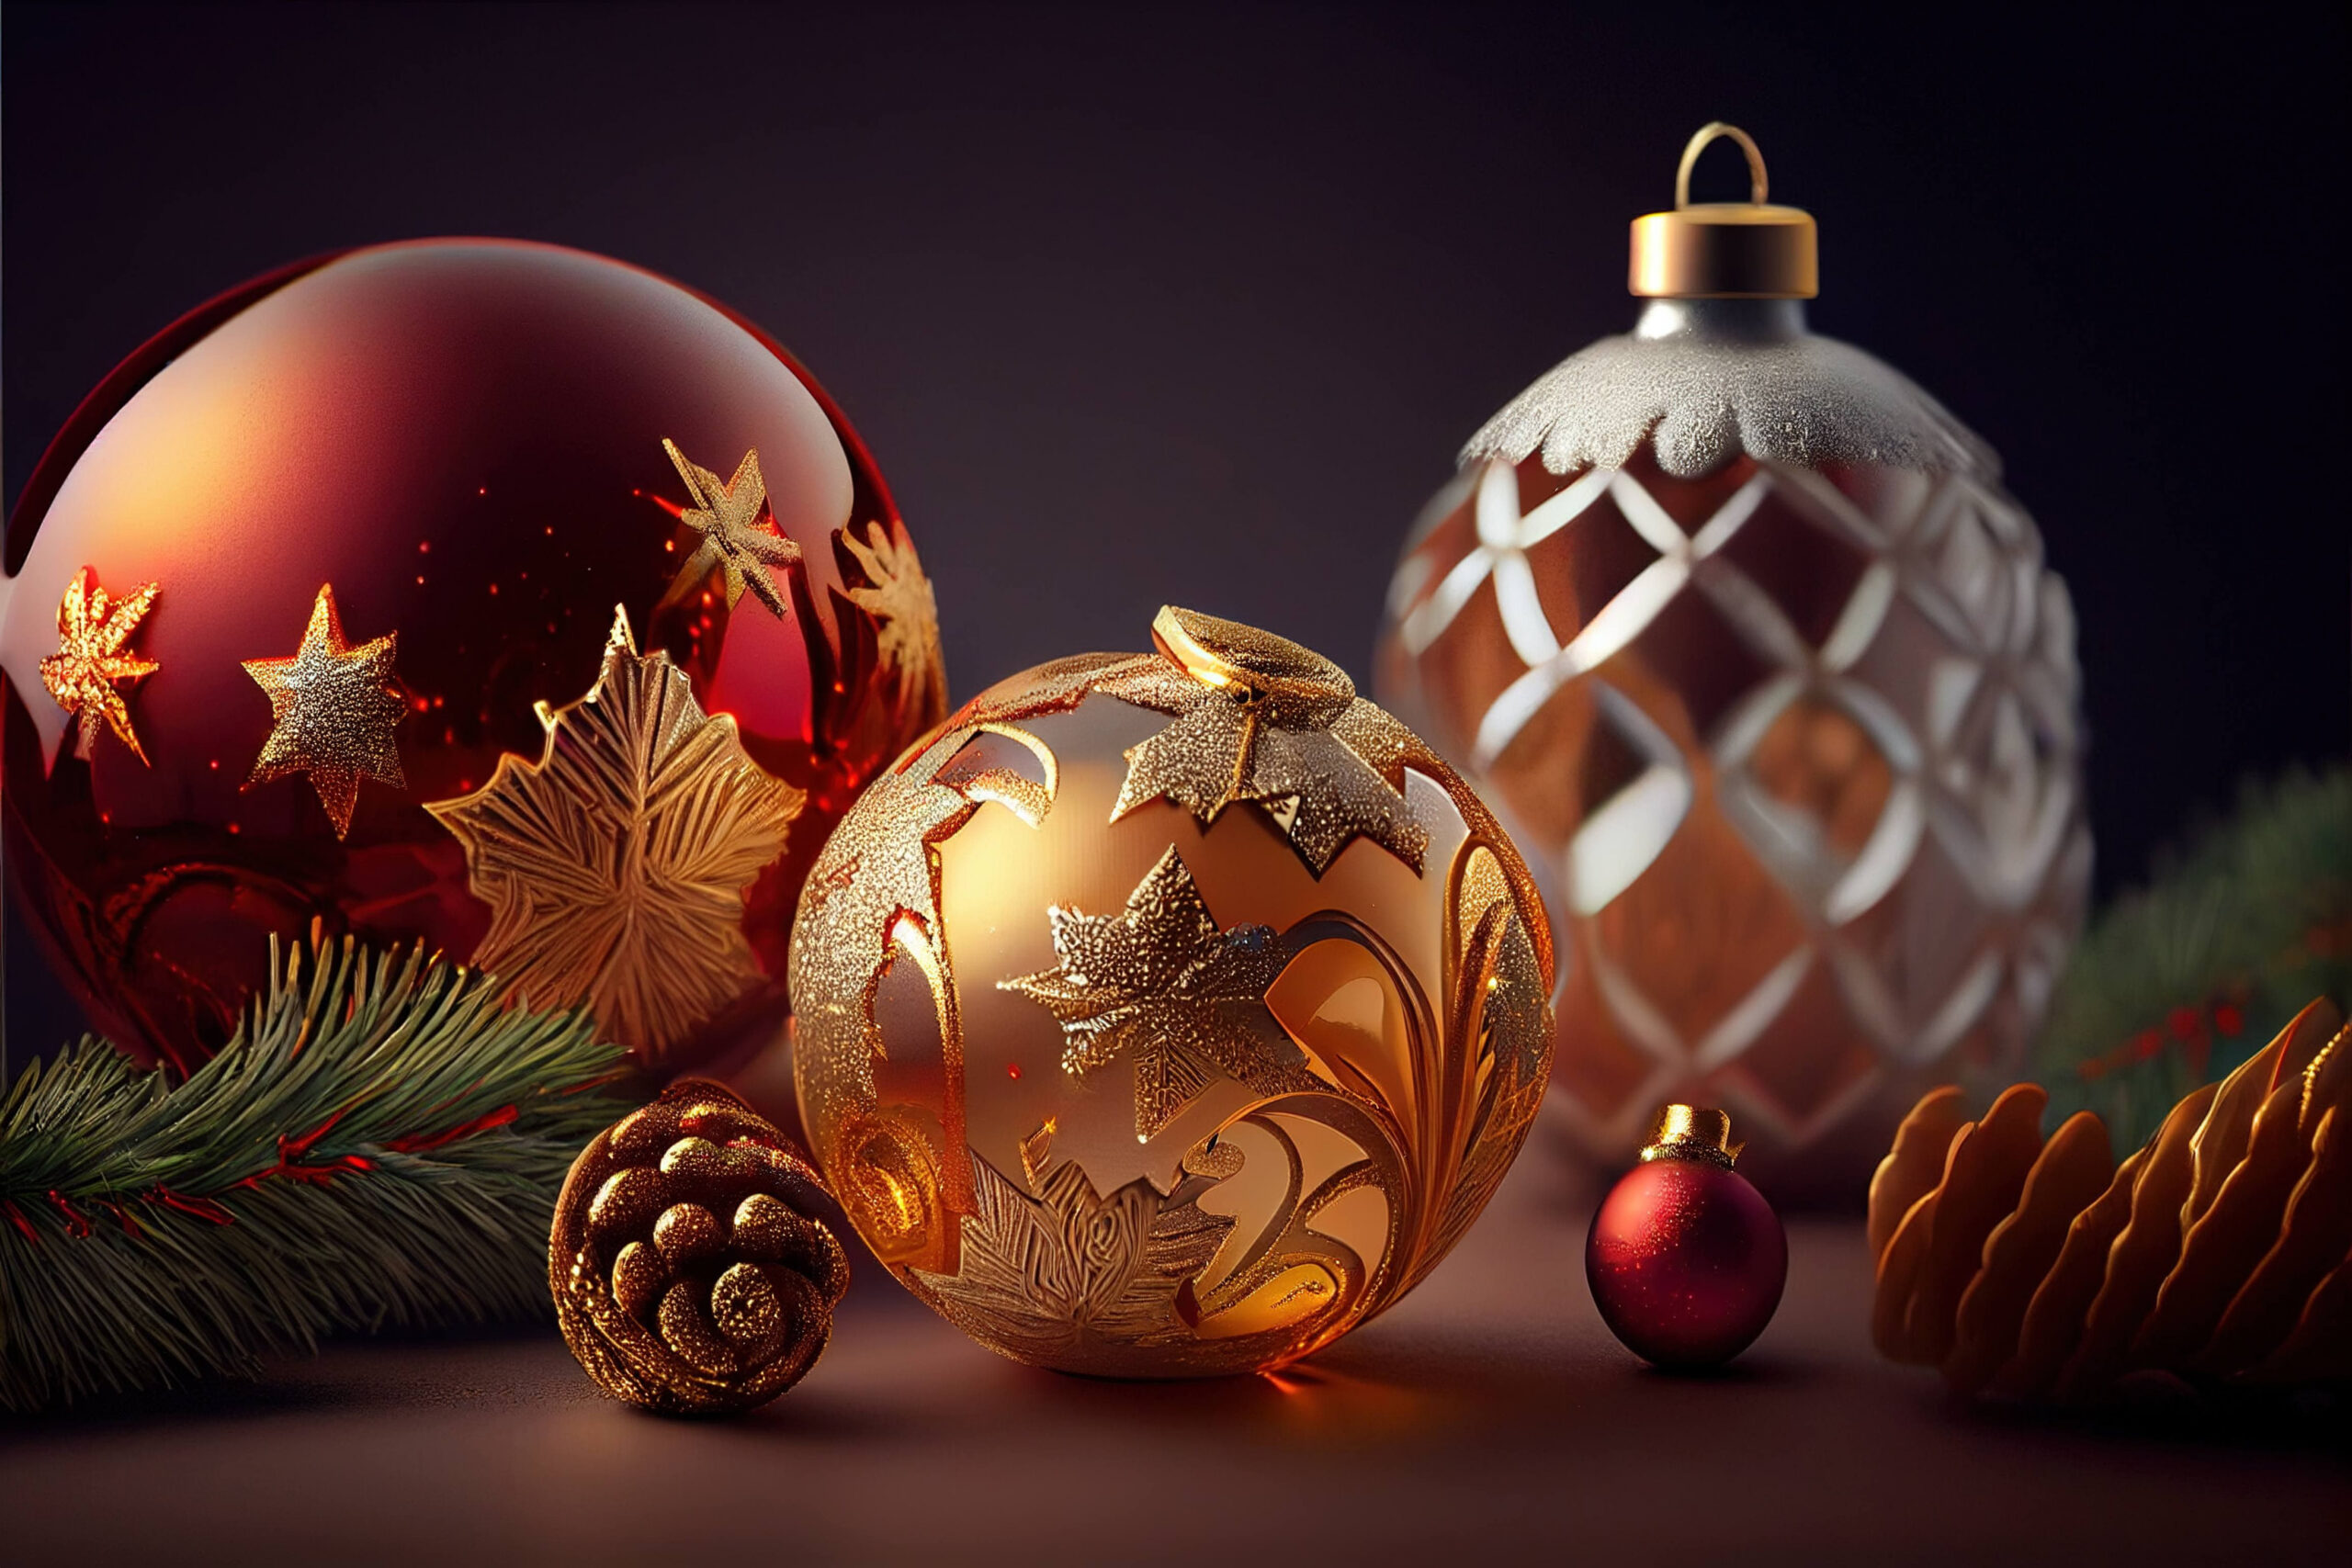 Christmas ornaments background wallpaper